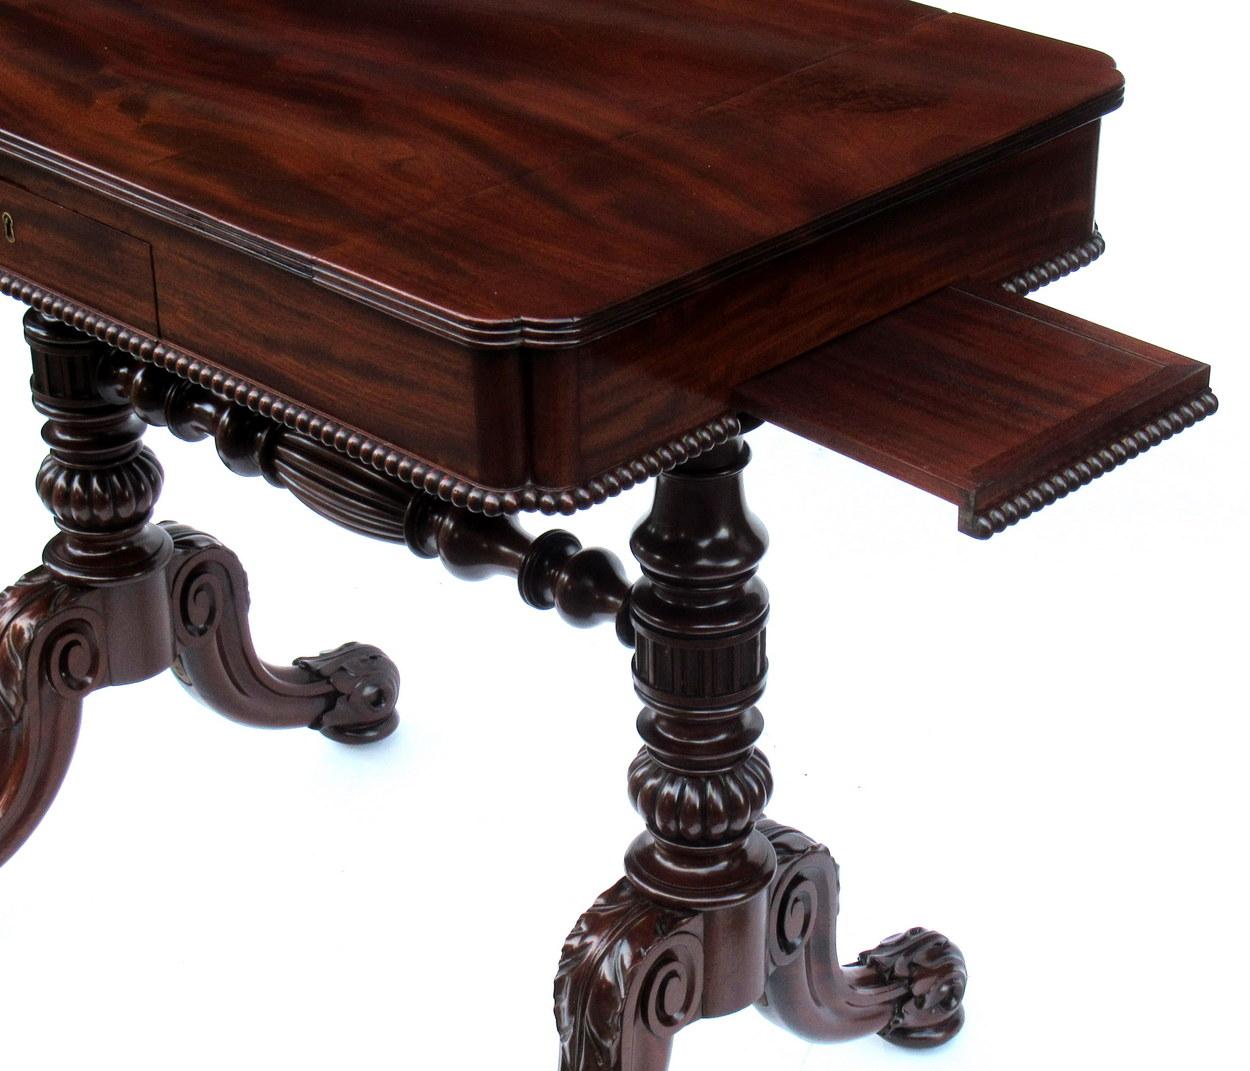 A games table of the George IV period of outstanding quality
Firmly attributable to Furniture Makers Gillows of Lancaster, circa 1820.
Constructed in a finely figured goncalo alves, the ornate ring turned end supports, with similar detailed cross